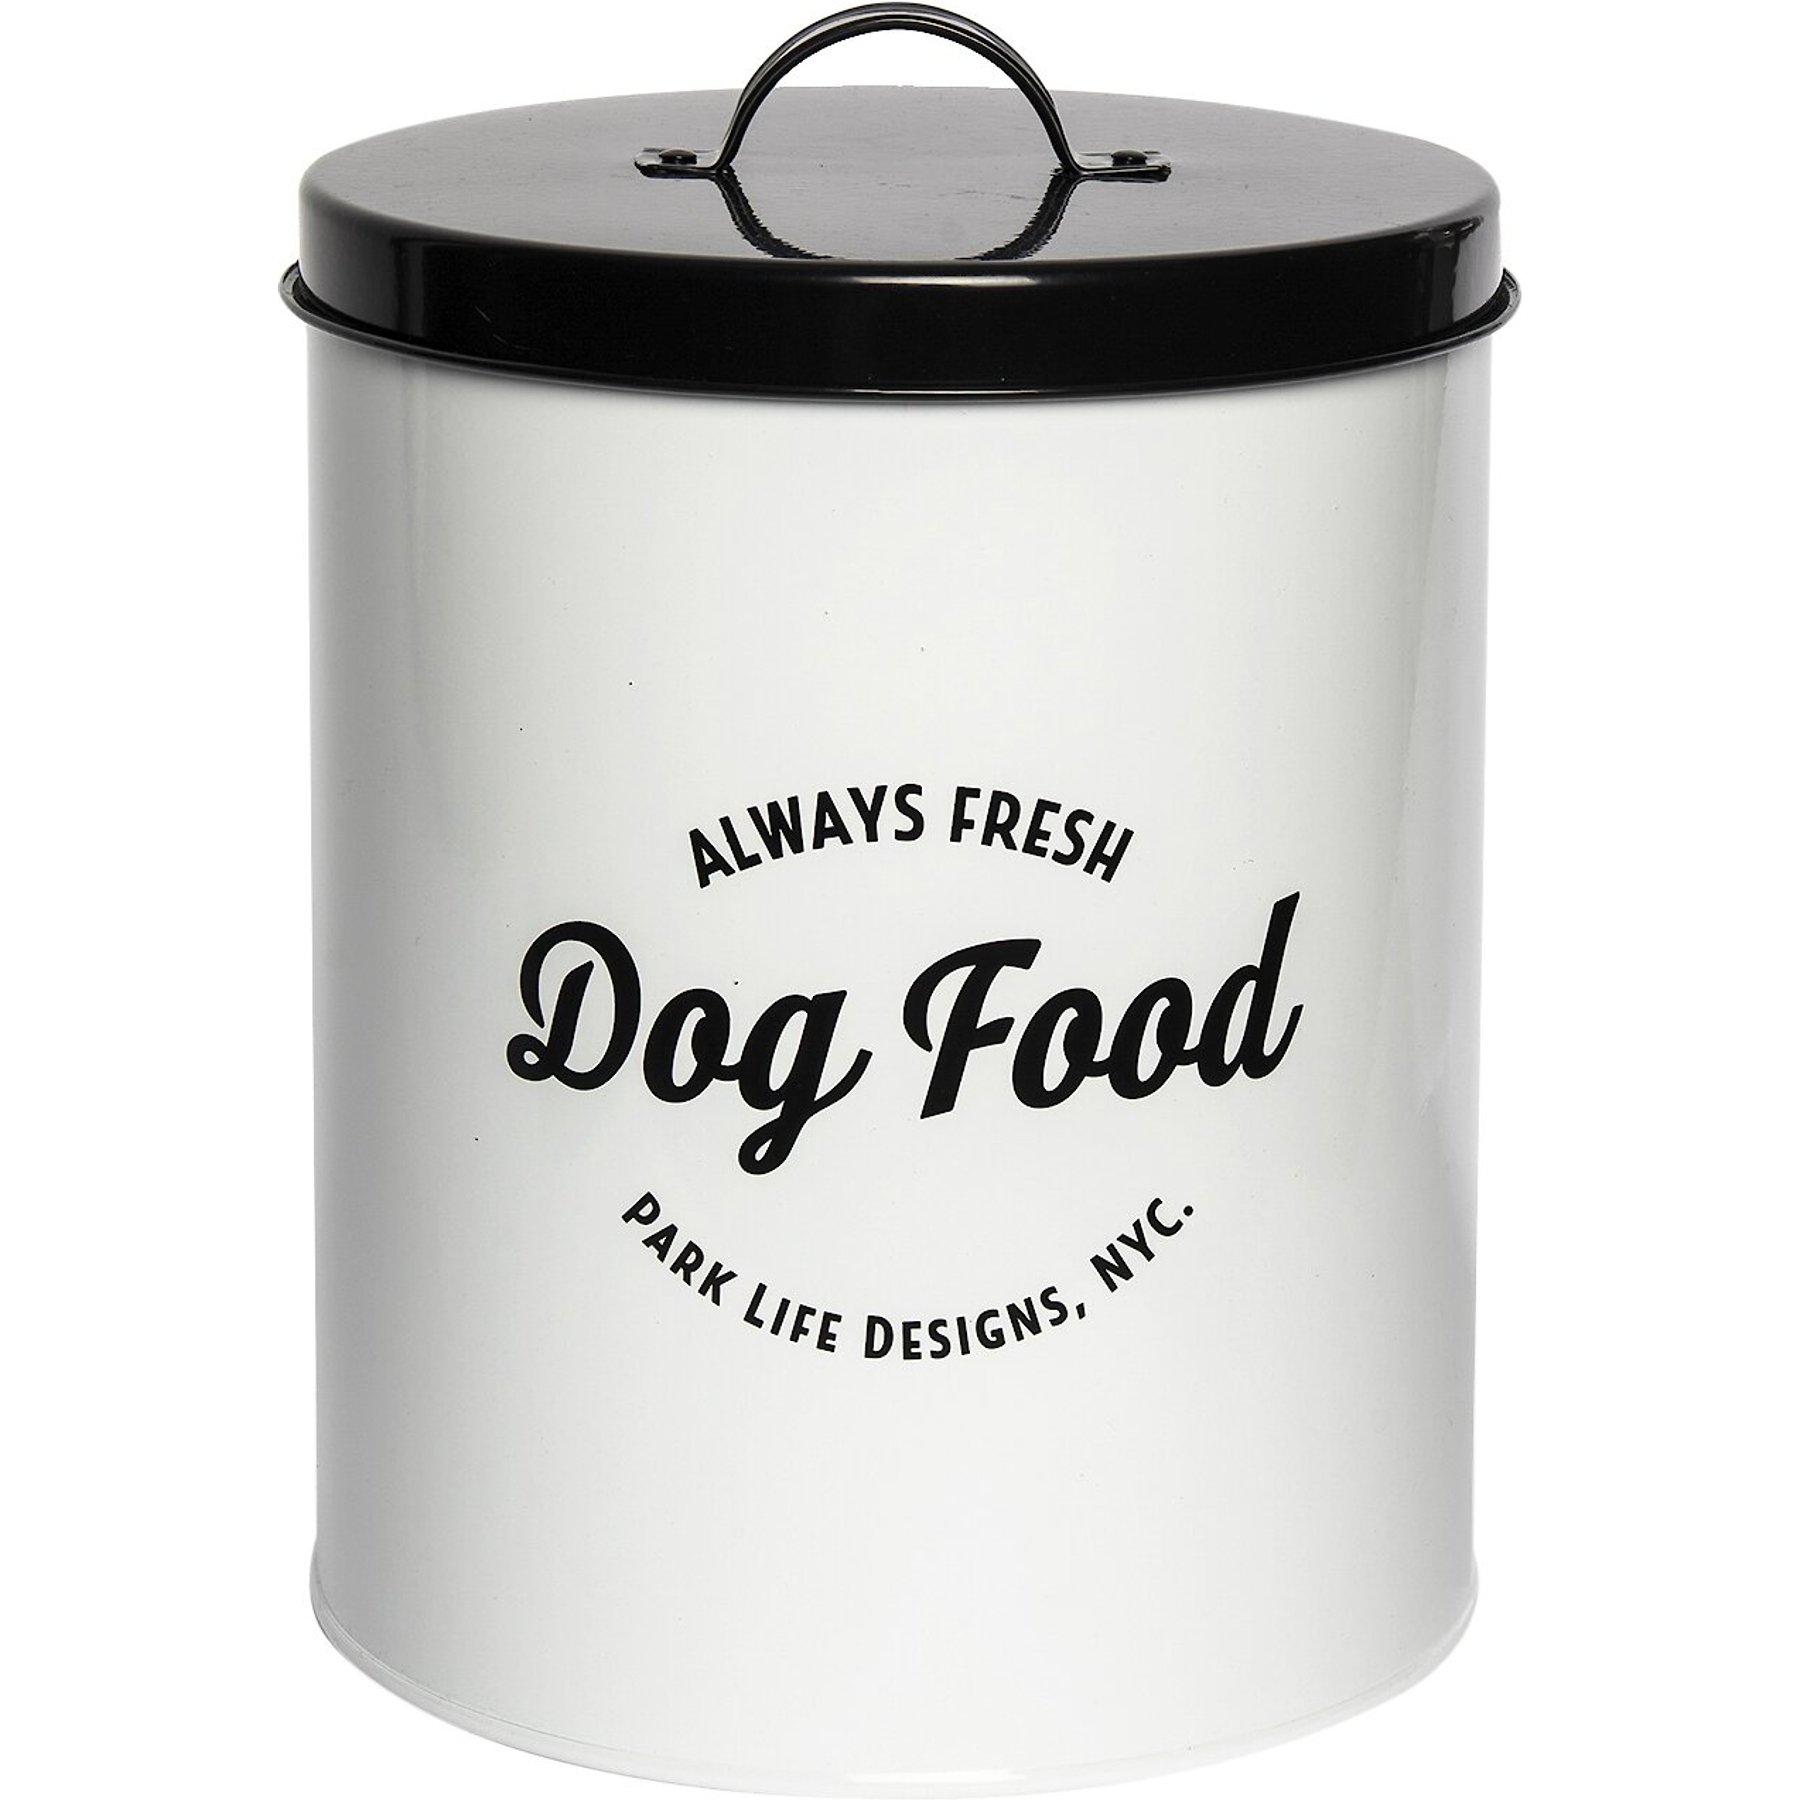 HANAMYA Pet Food Storage Container with Measuring Cup, White & Gray, 33-L, 1 Count